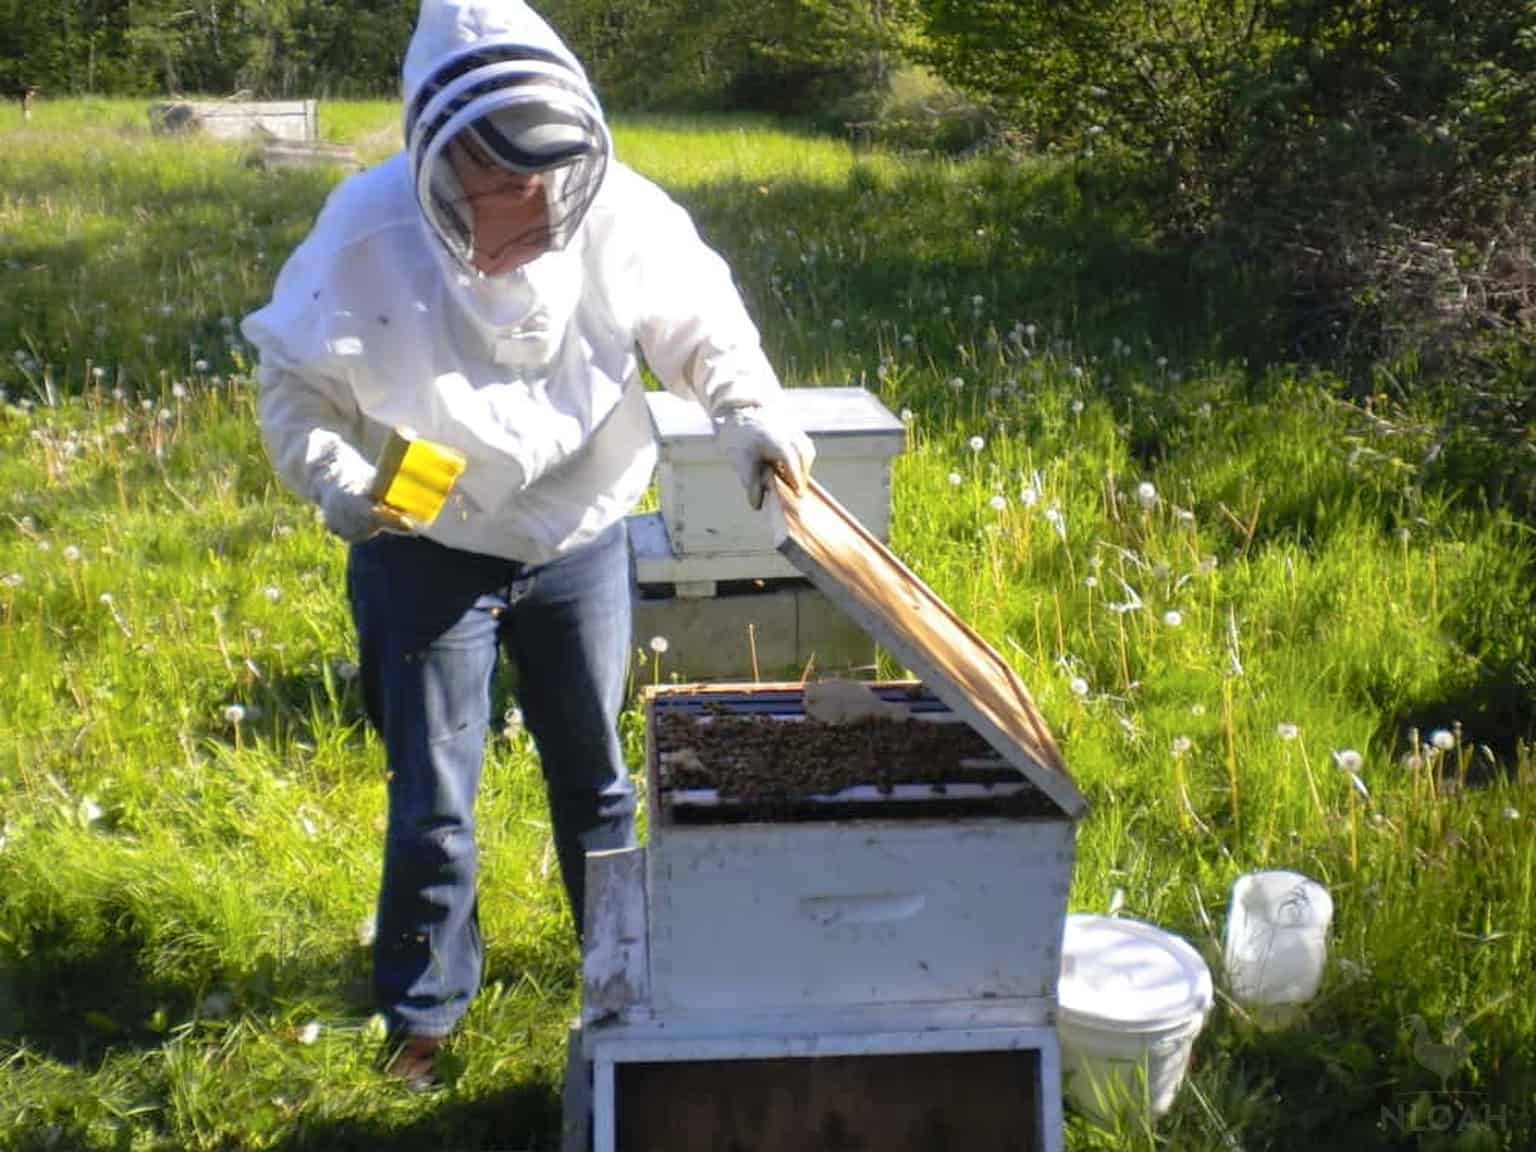 opening up a beehive